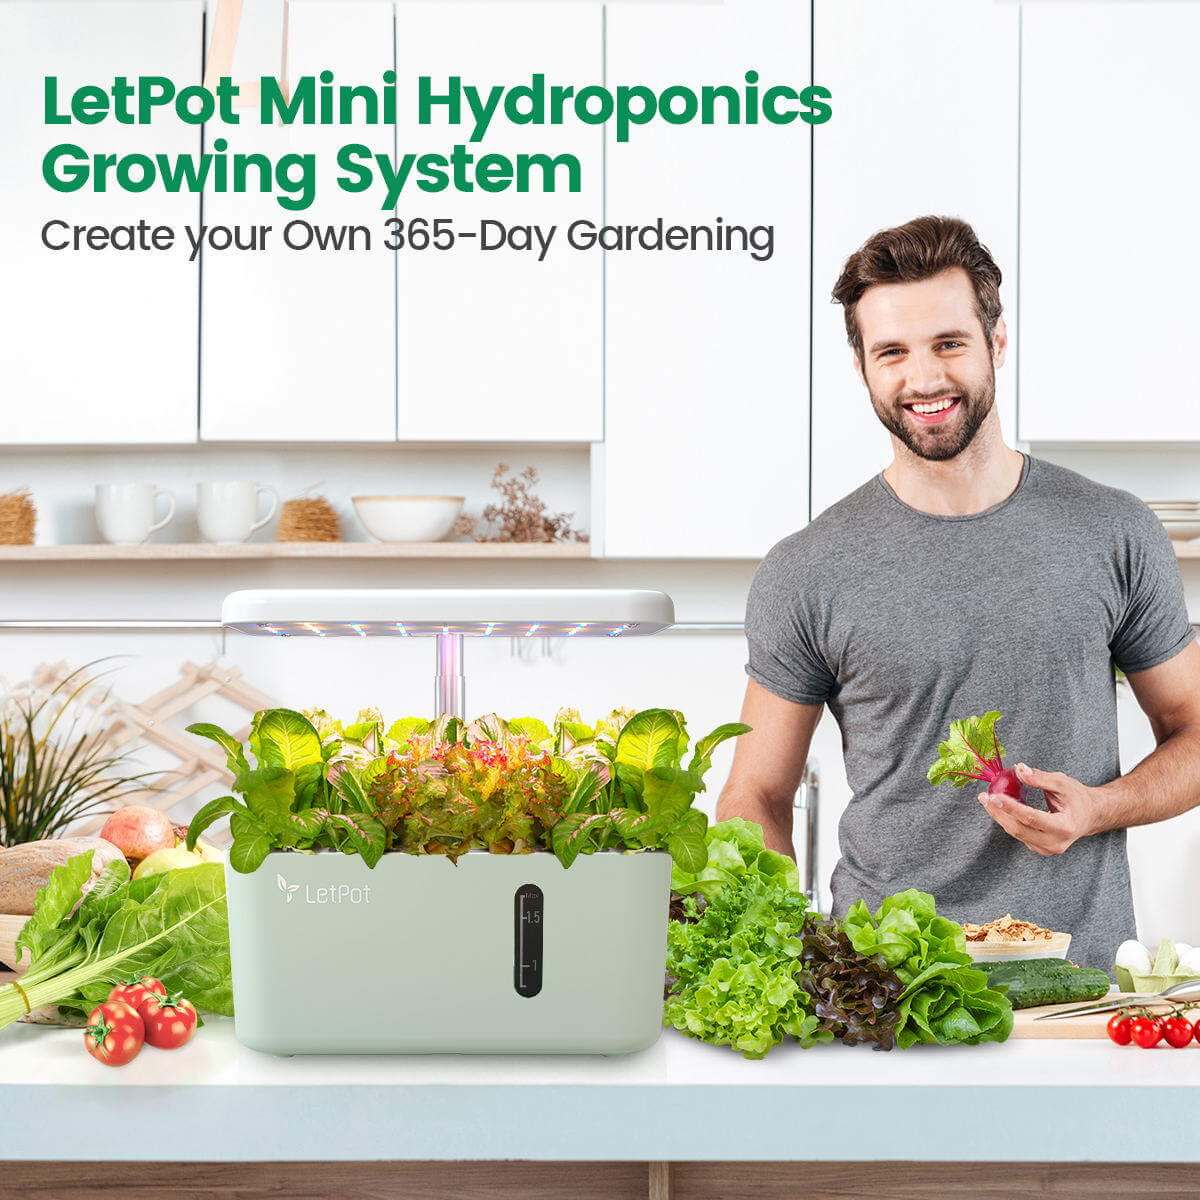 LetPot Mini Hydroponic Growing System - Create Your Own 365-Day Garden